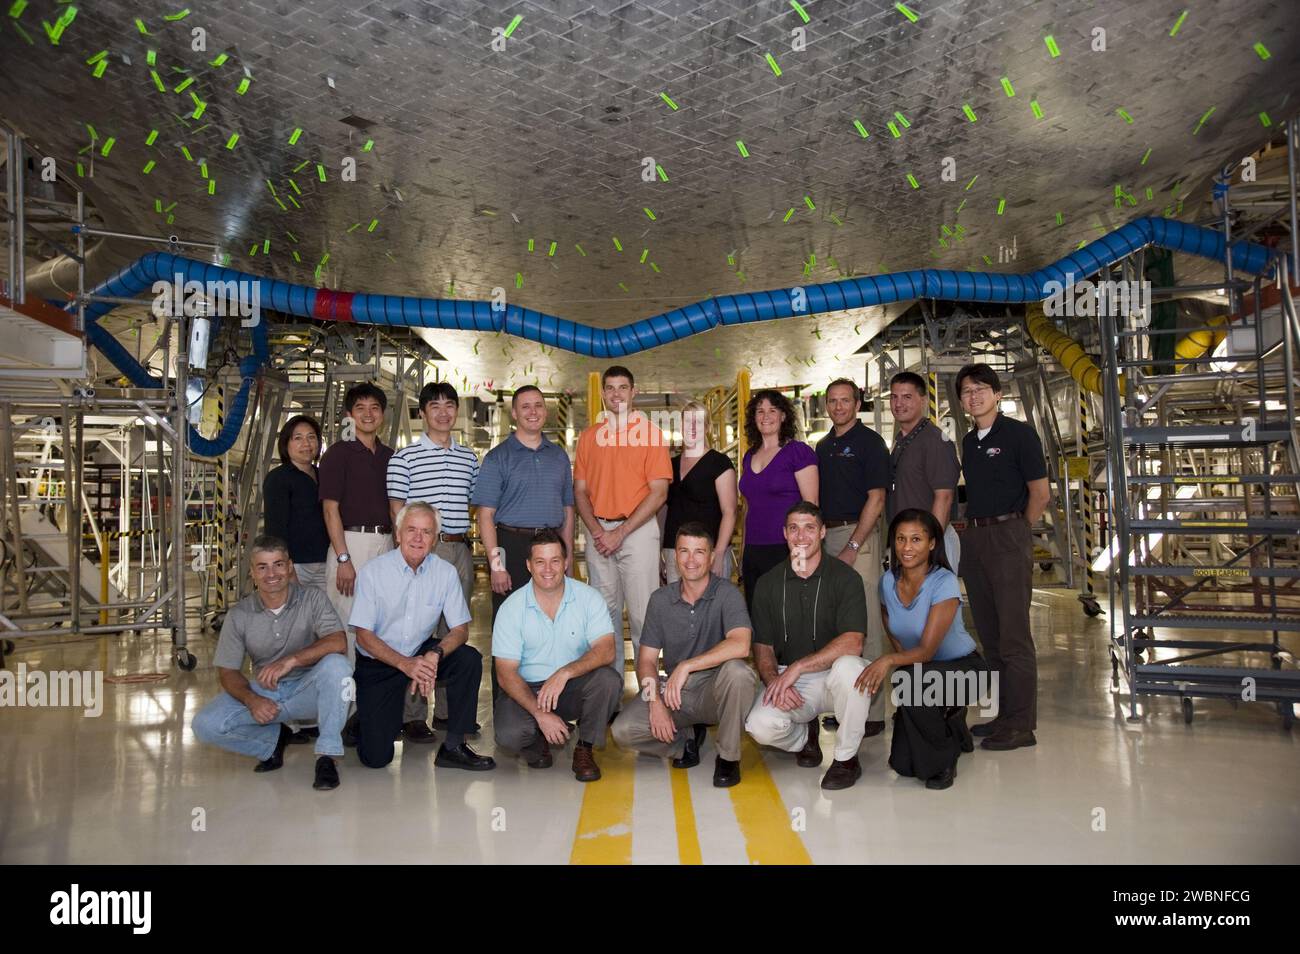 CAPE CANAVERAL, Fla. --- At NASA's Kennedy Space Center in Florida, the Class of 2009 Astronaut Candidates, also called ASCANs, take a picture under space shuttle Atlantis in Orbiter Processing Facility-1. Standing, from left, are Astronaut Office Training Specialist Debbie Trainor, JAXA's Takuya Onishi and Kimiya Yui, NASA's Air Force Maj. Jack D. Fischer, CSA's Jeremy Hansen, NASA's Kathleen 'Kate' Rubins and Serena M. Aunon, CSA's David Saint-Jacques, NASA's Kjell N. Lindgren, and JAXA's Norishige Kanai. Kneeling, from left, are NASA's Army Lt. Col. Mark T. Vande, Chief of the Astronaut Can Stock Photo